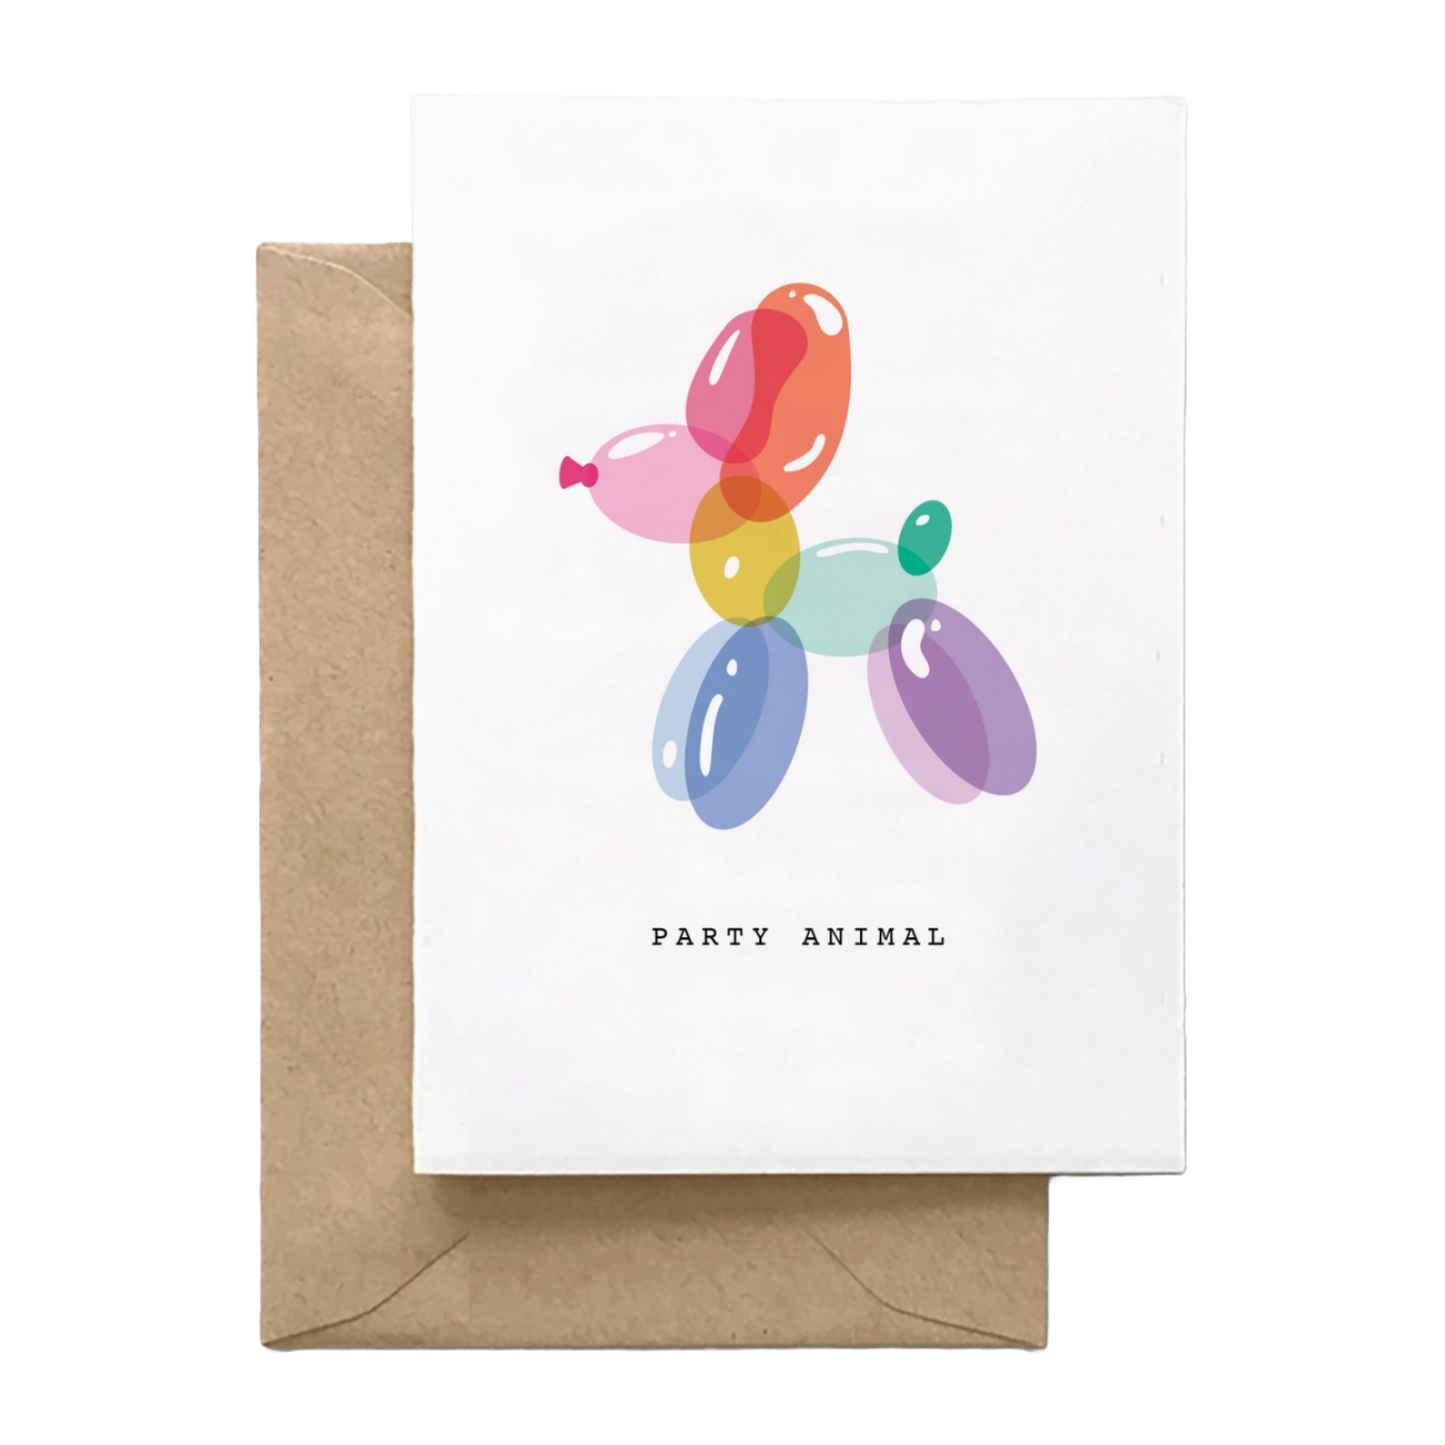 Party Animal Card by Spaghetti & Meatballs